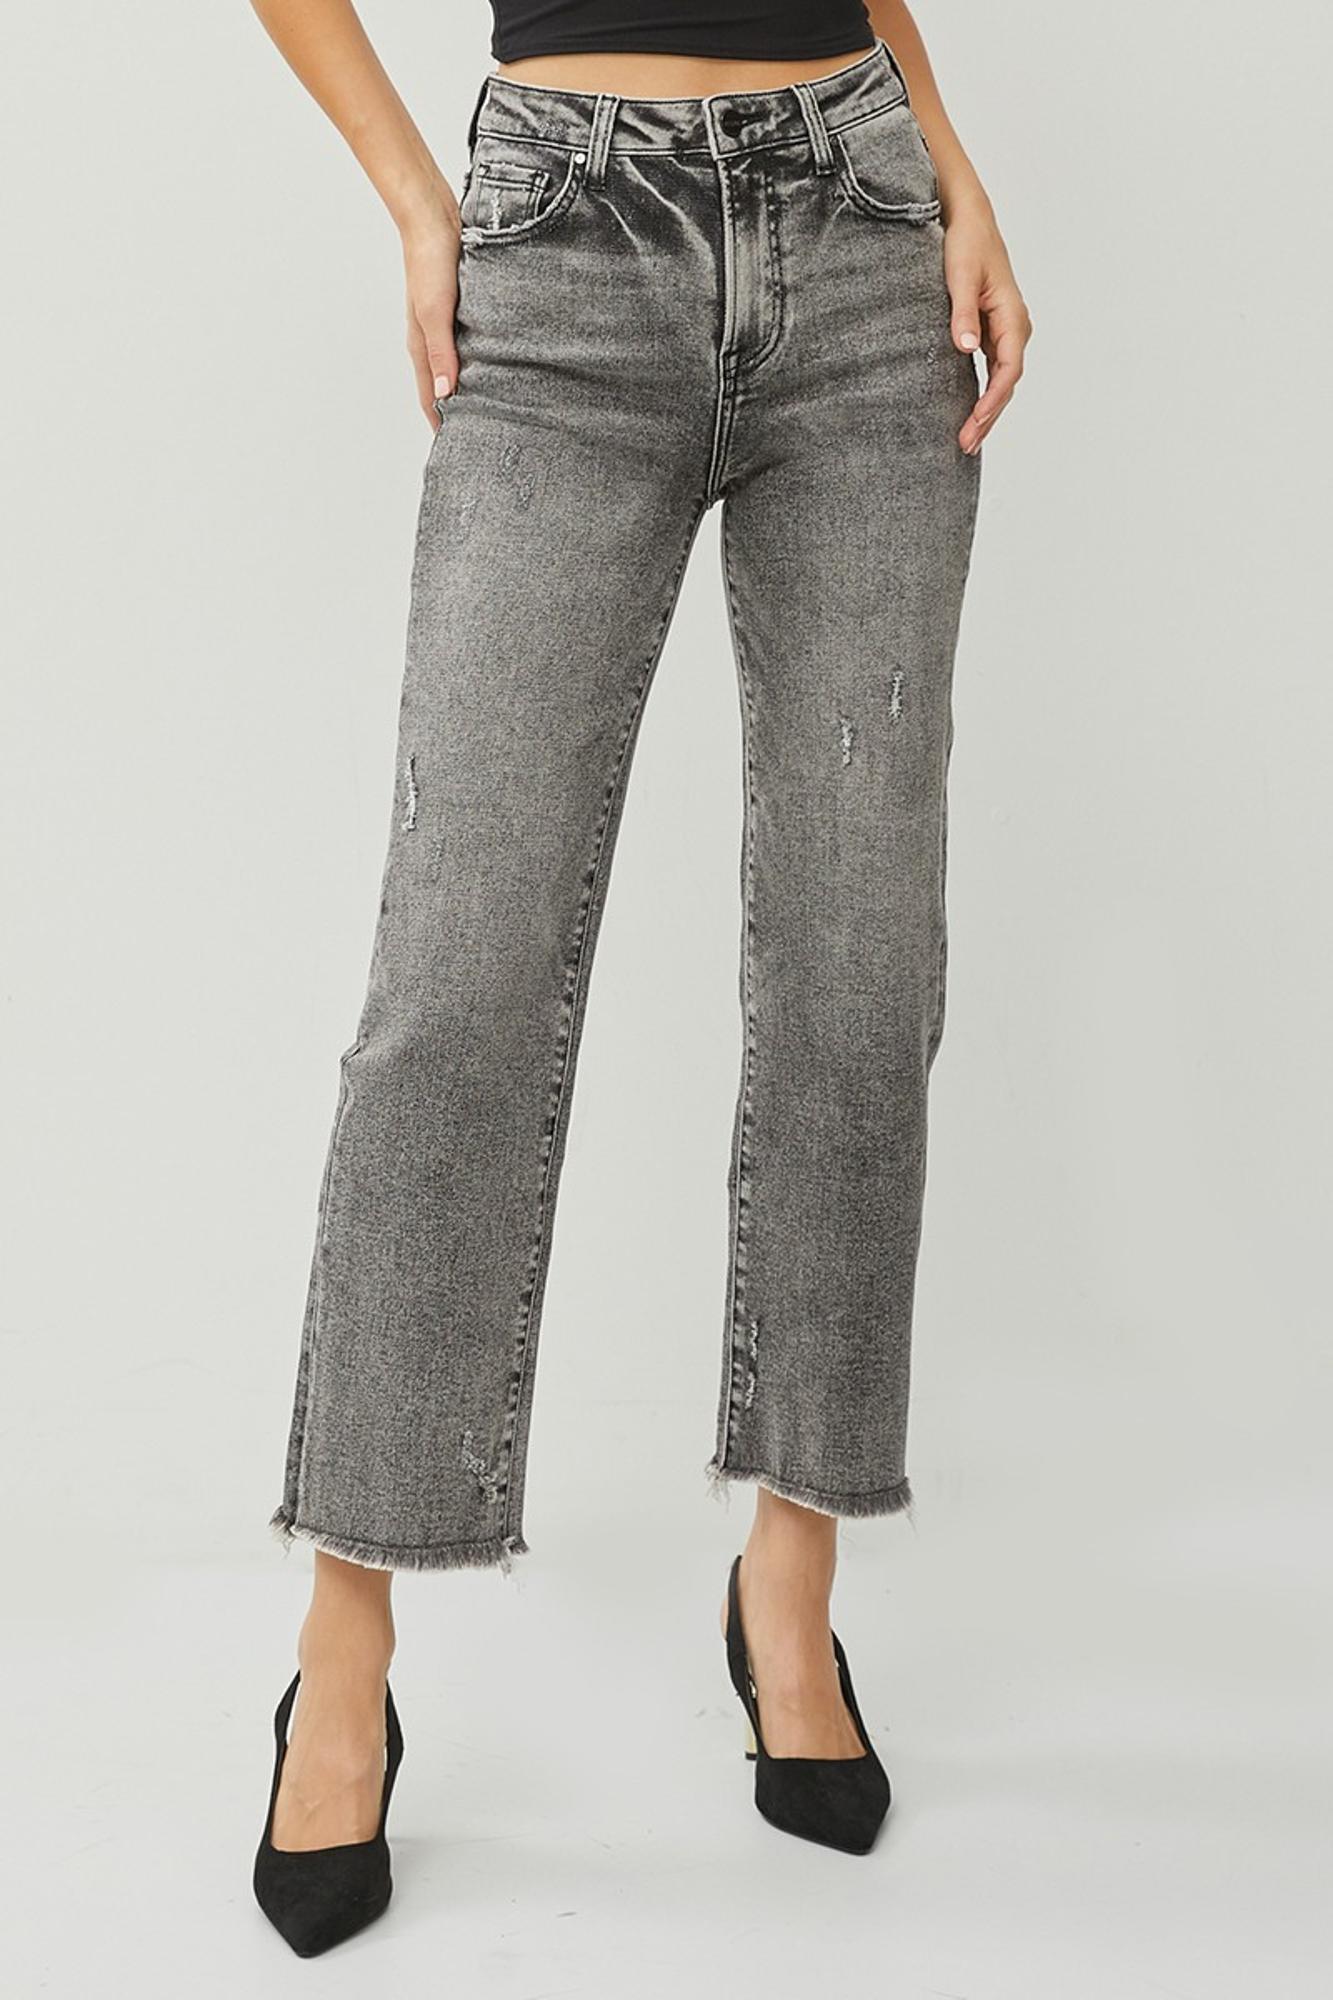 Kaitlyn's Fav Straight Leg Distressed Cropped Jeans